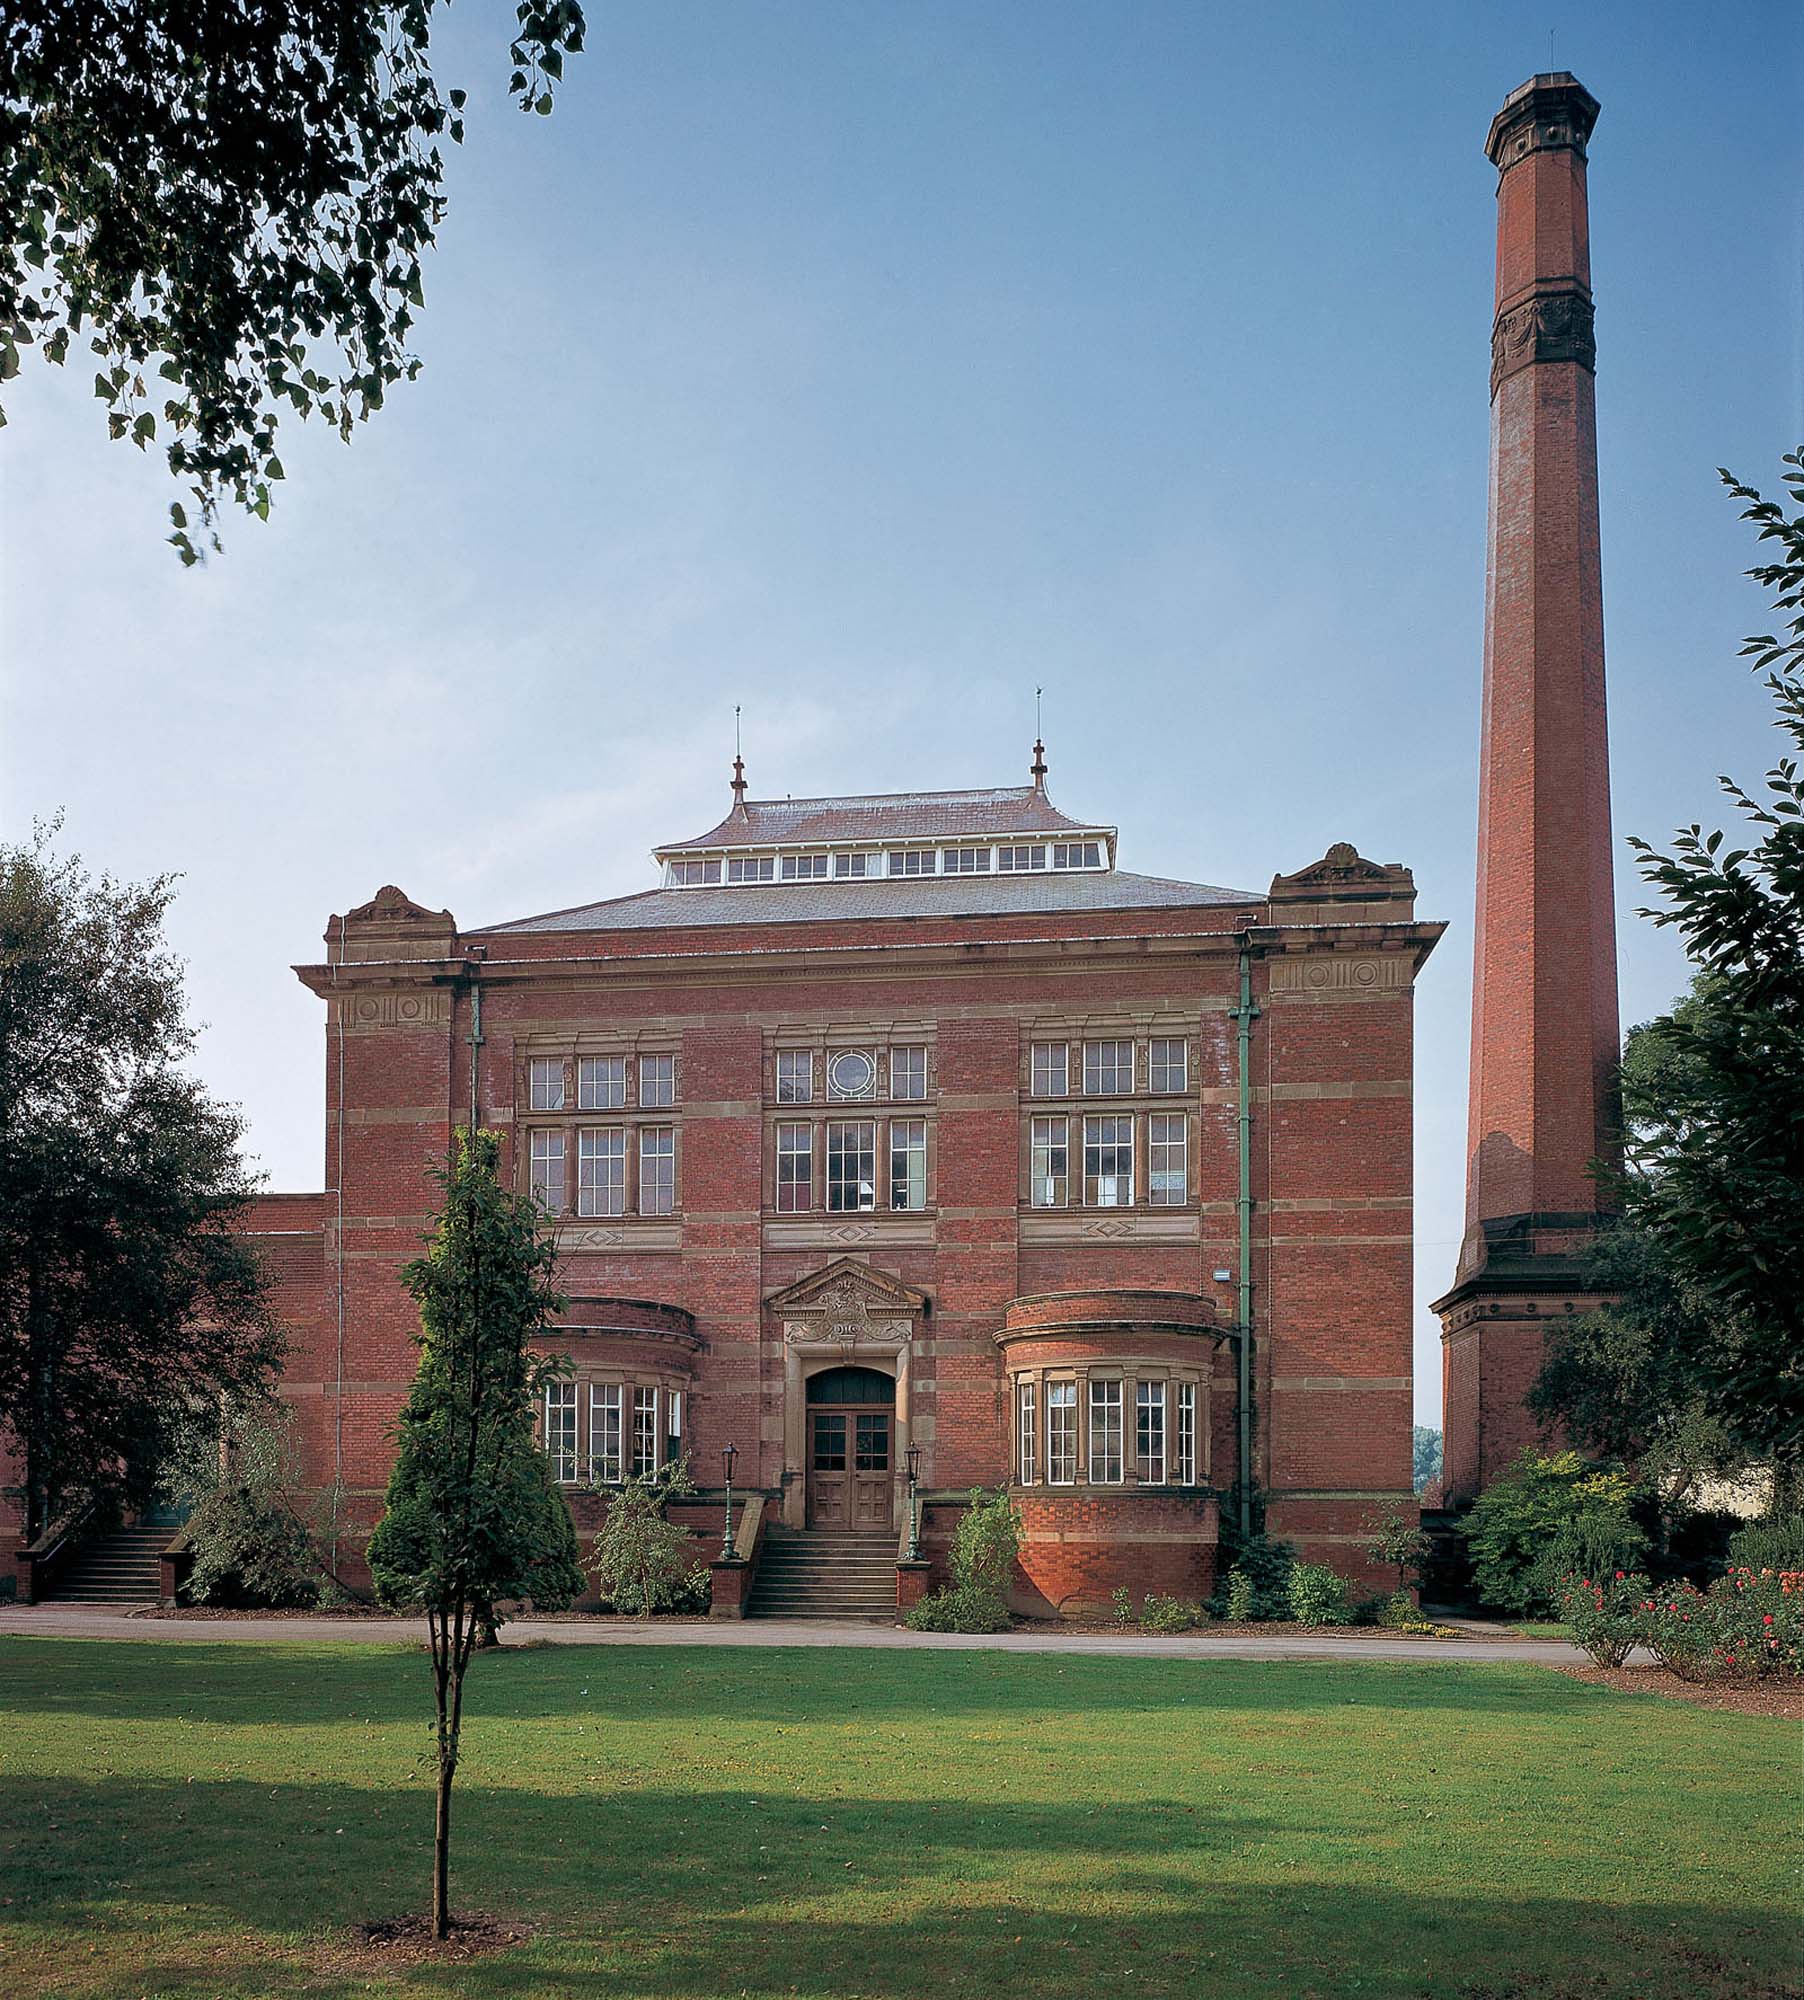 A view of the magnificent Victorian building and chimney - 